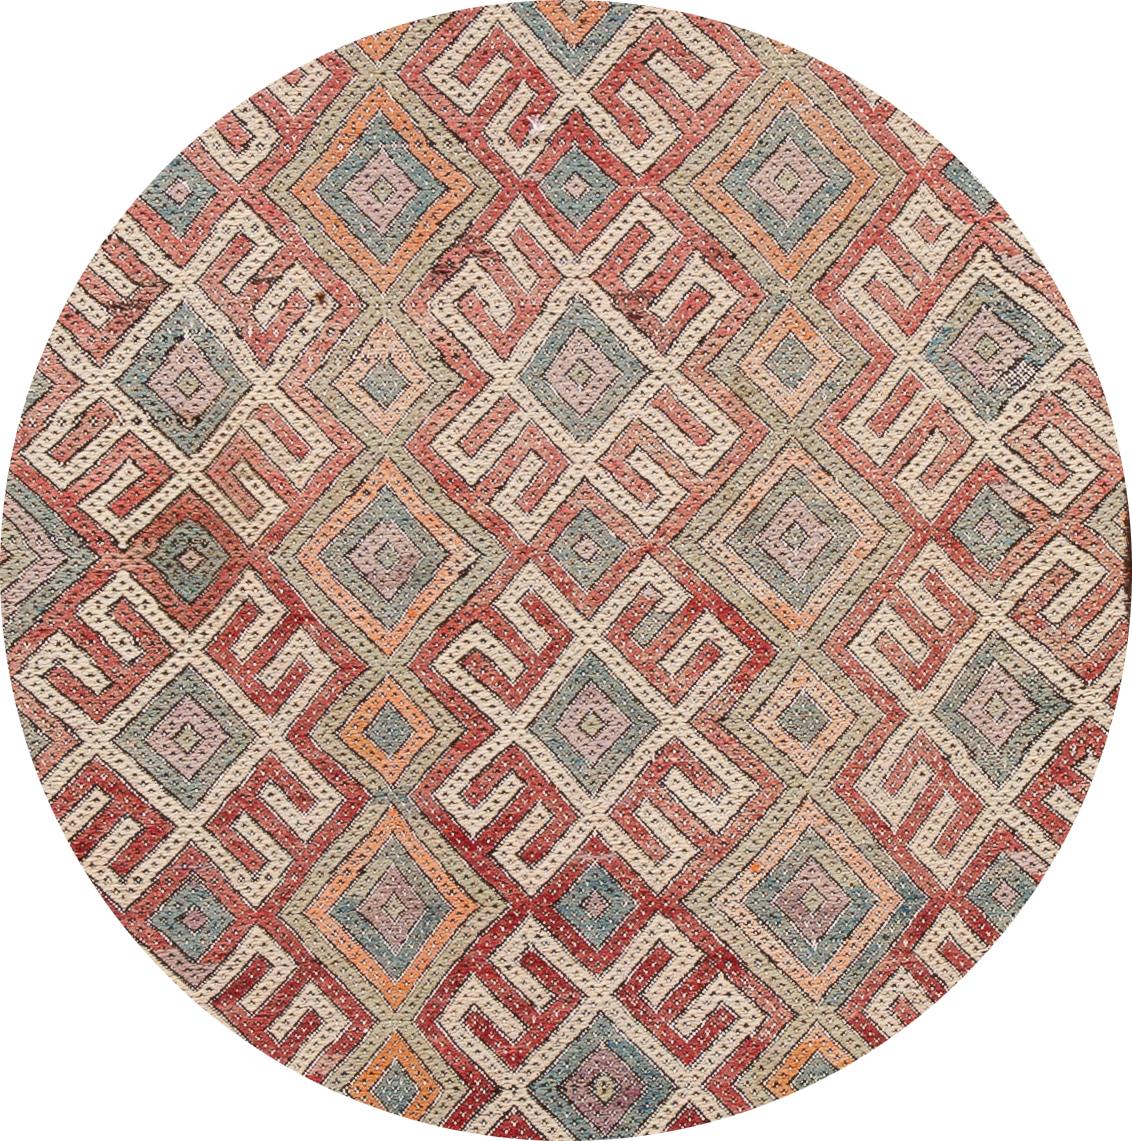 Beautiful vintage Sumakh runner with an all-over multi-color motif. This piece has fine details, great colors, and a beautiful geometric design. It would be the perfect addition to your home.

This rug measures 3' 2